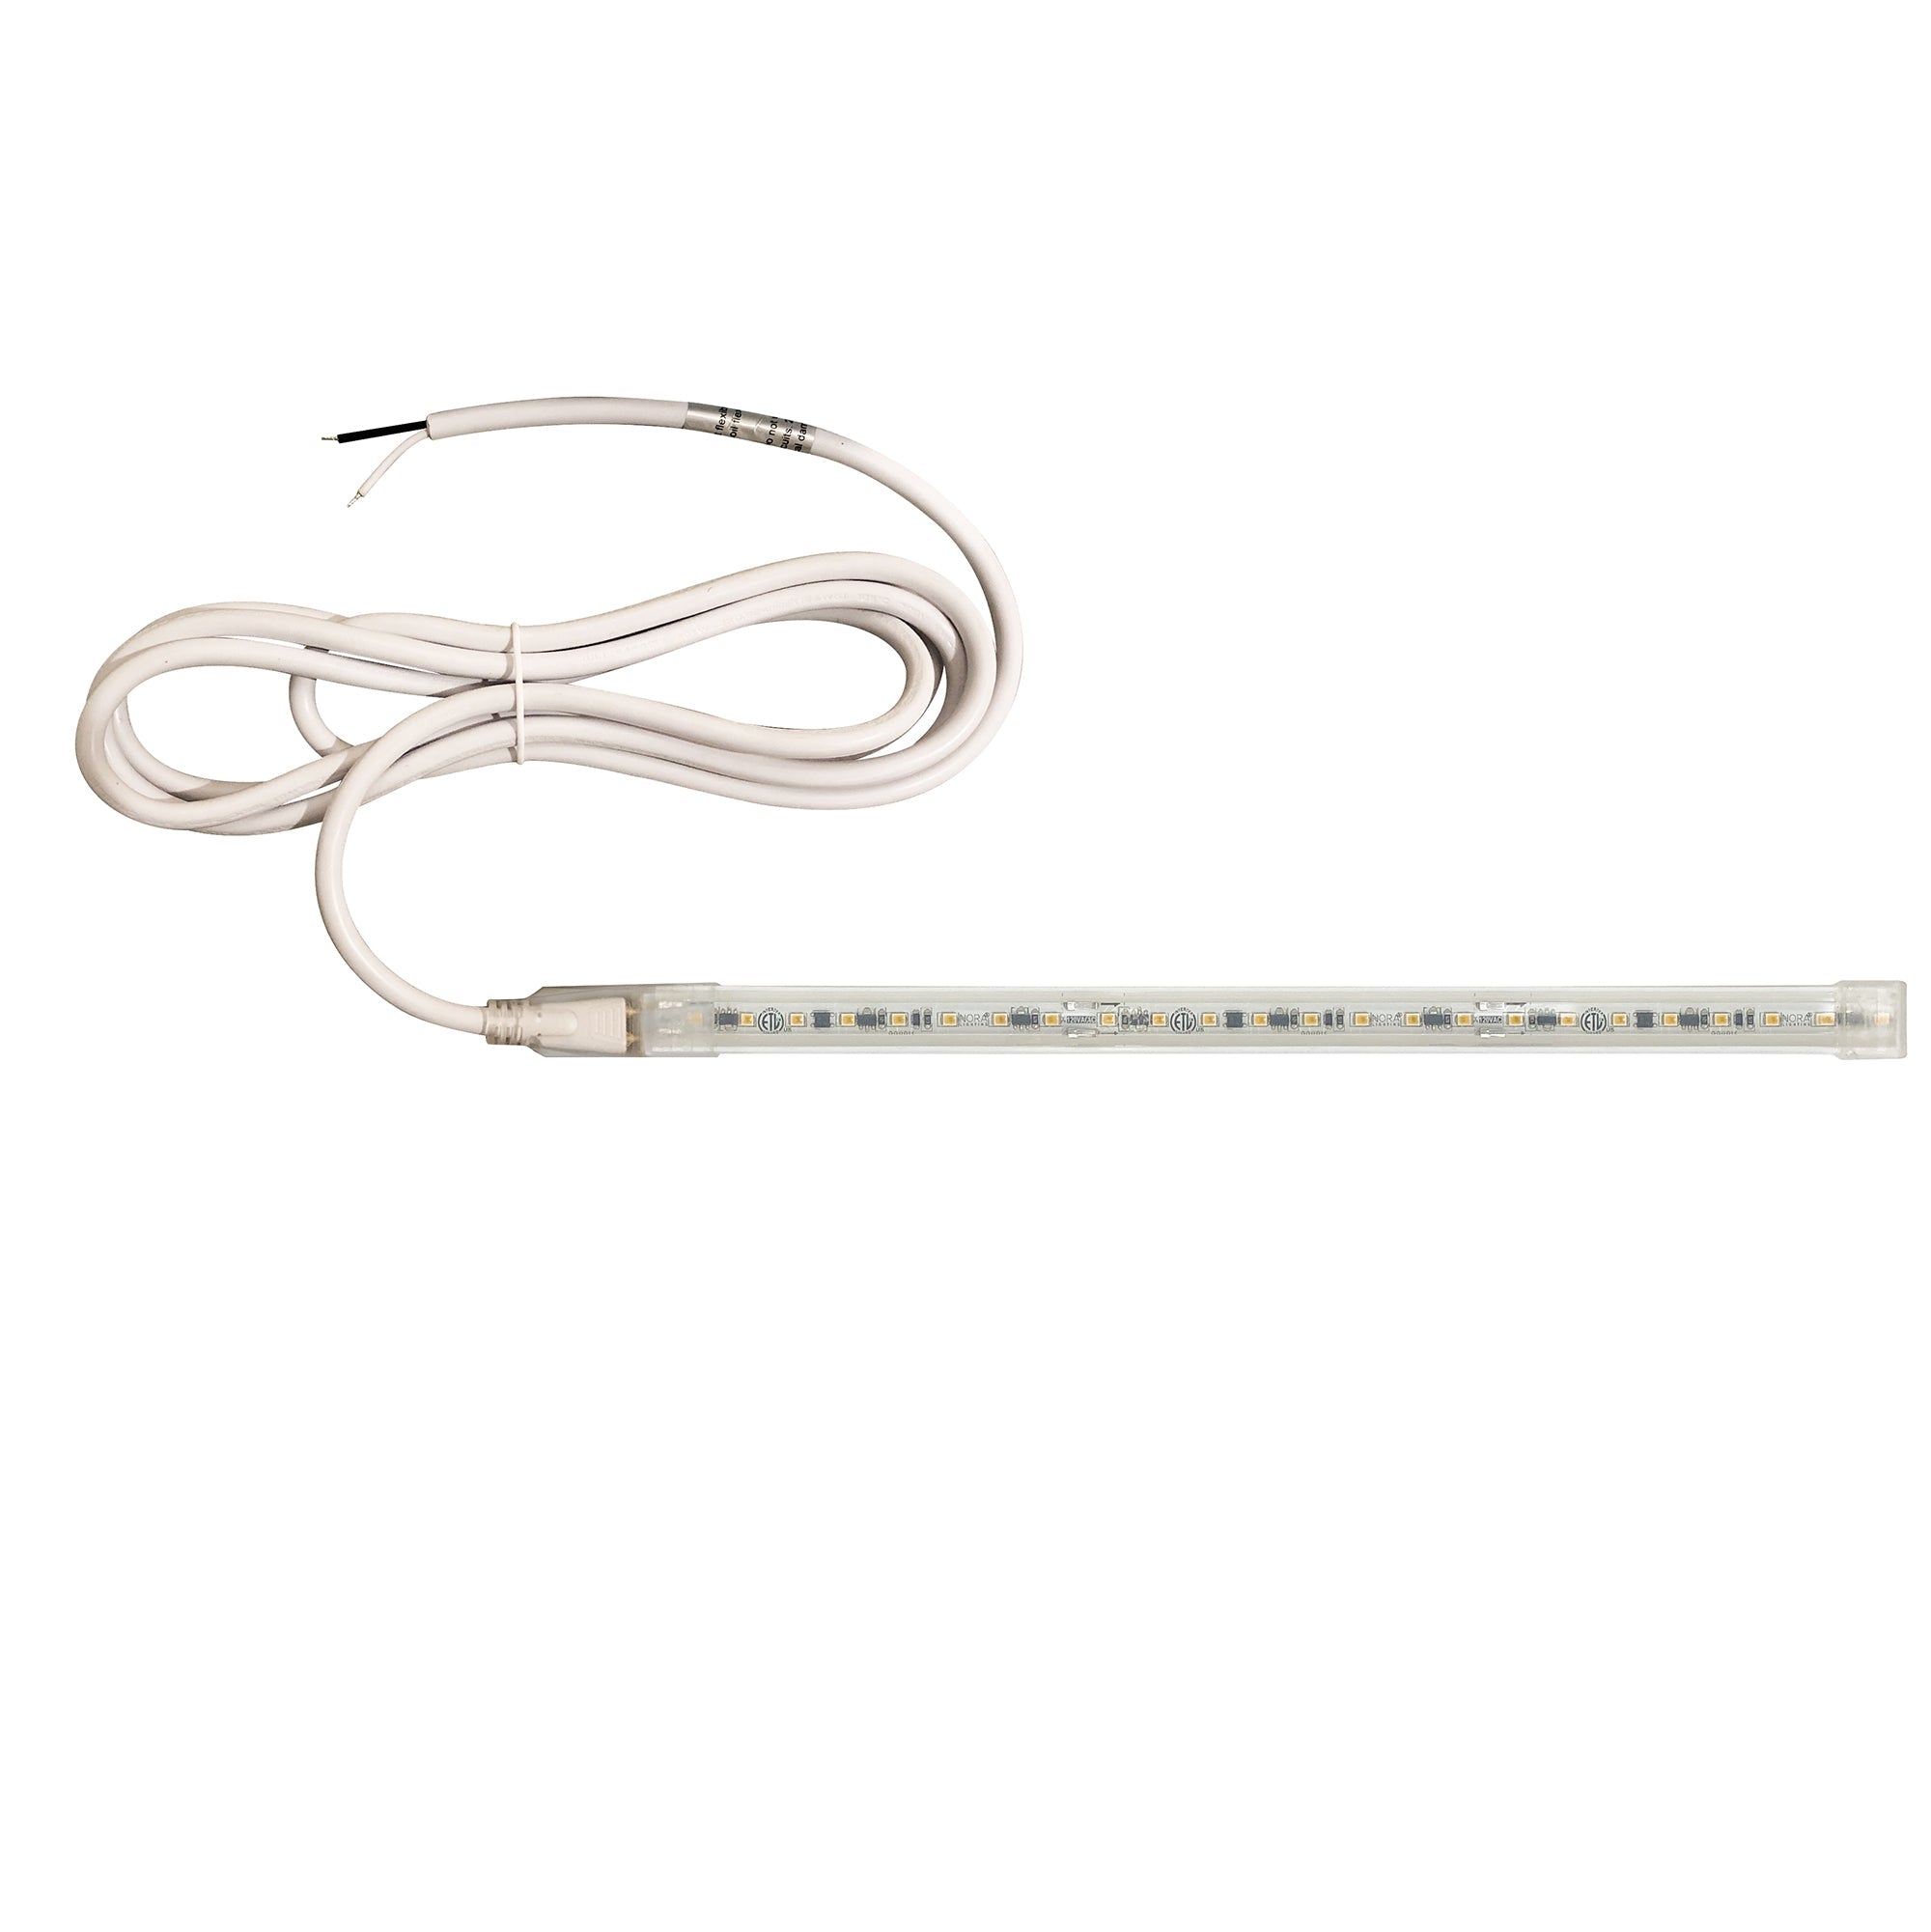 Nora Lighting NUTP13-W50-12-927/HW - Accent / Undercabinet - Custom Cut 50-ft 120V Continuous LED Tape Light, 330lm / 3.6W per foot, 2700K, w/ Mounting Clips and 8' Hardwired Power Cord